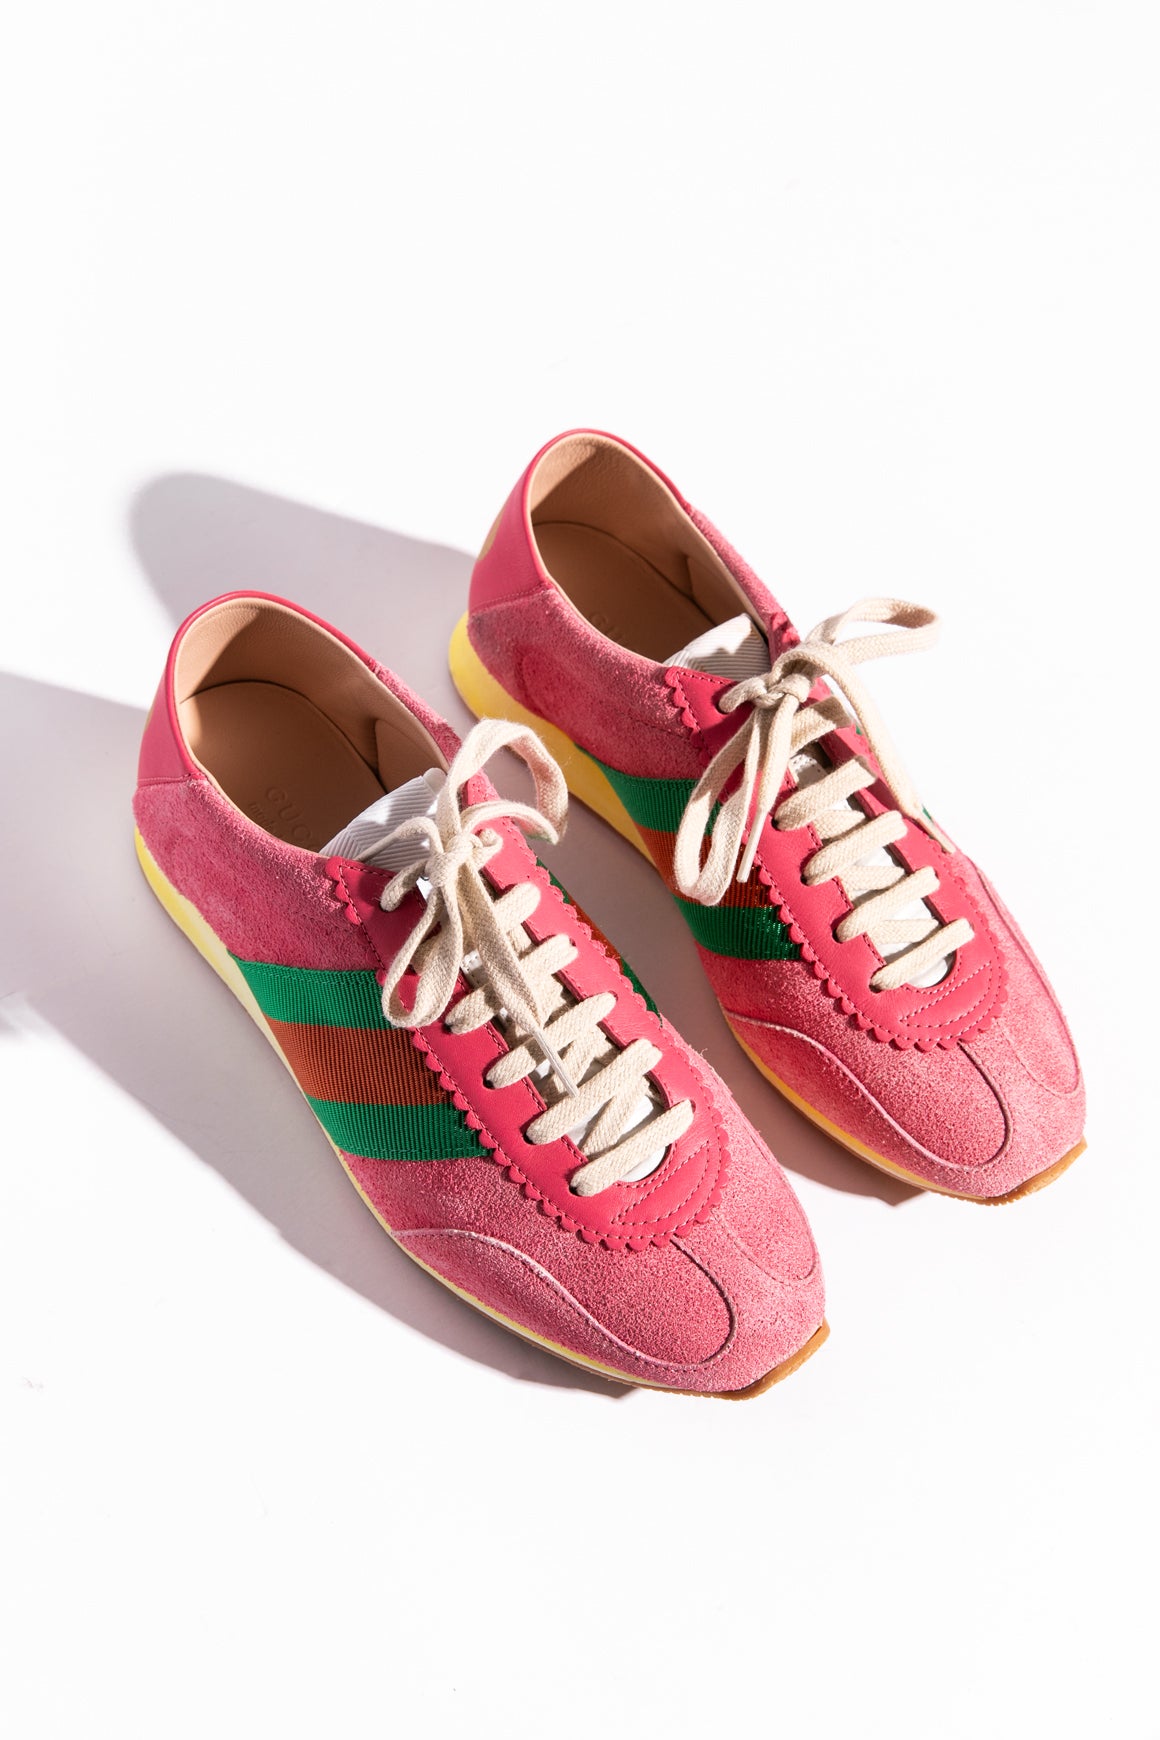 GUCCI Pink Suede Sneakers (Sz. 37)